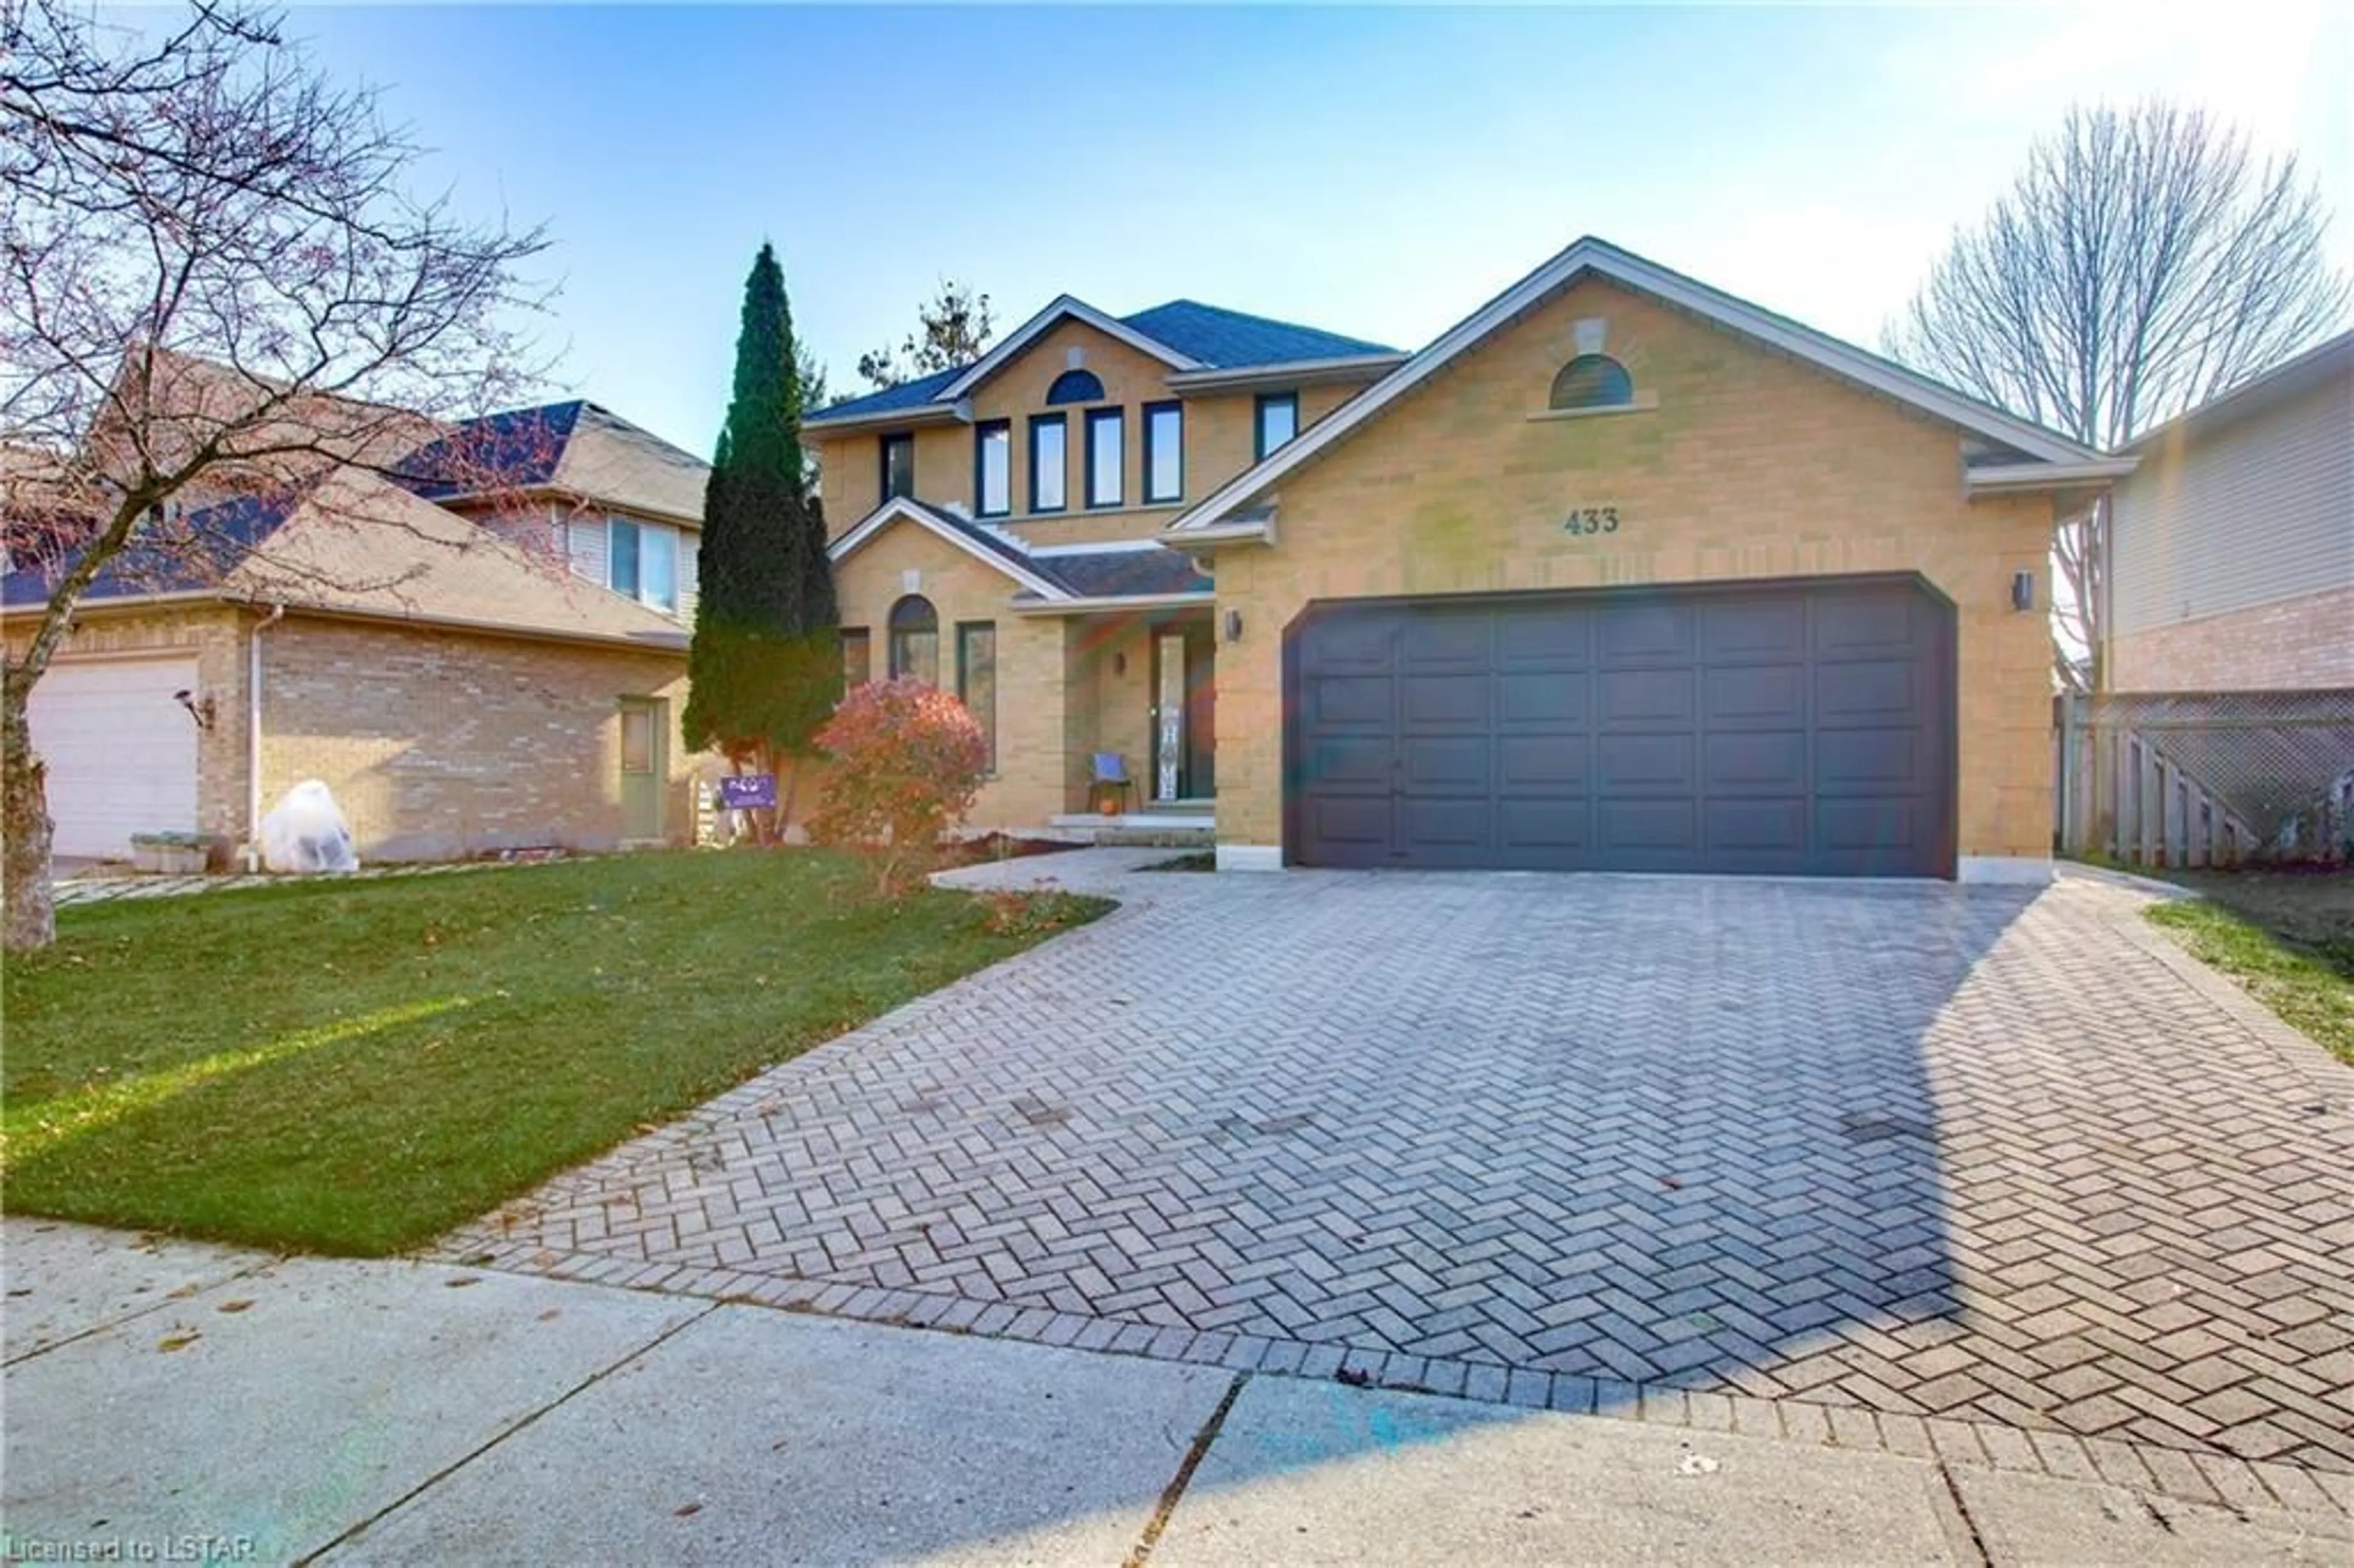 Home with brick exterior material for 433 Ambleside Dr, London Ontario N6G 4X9